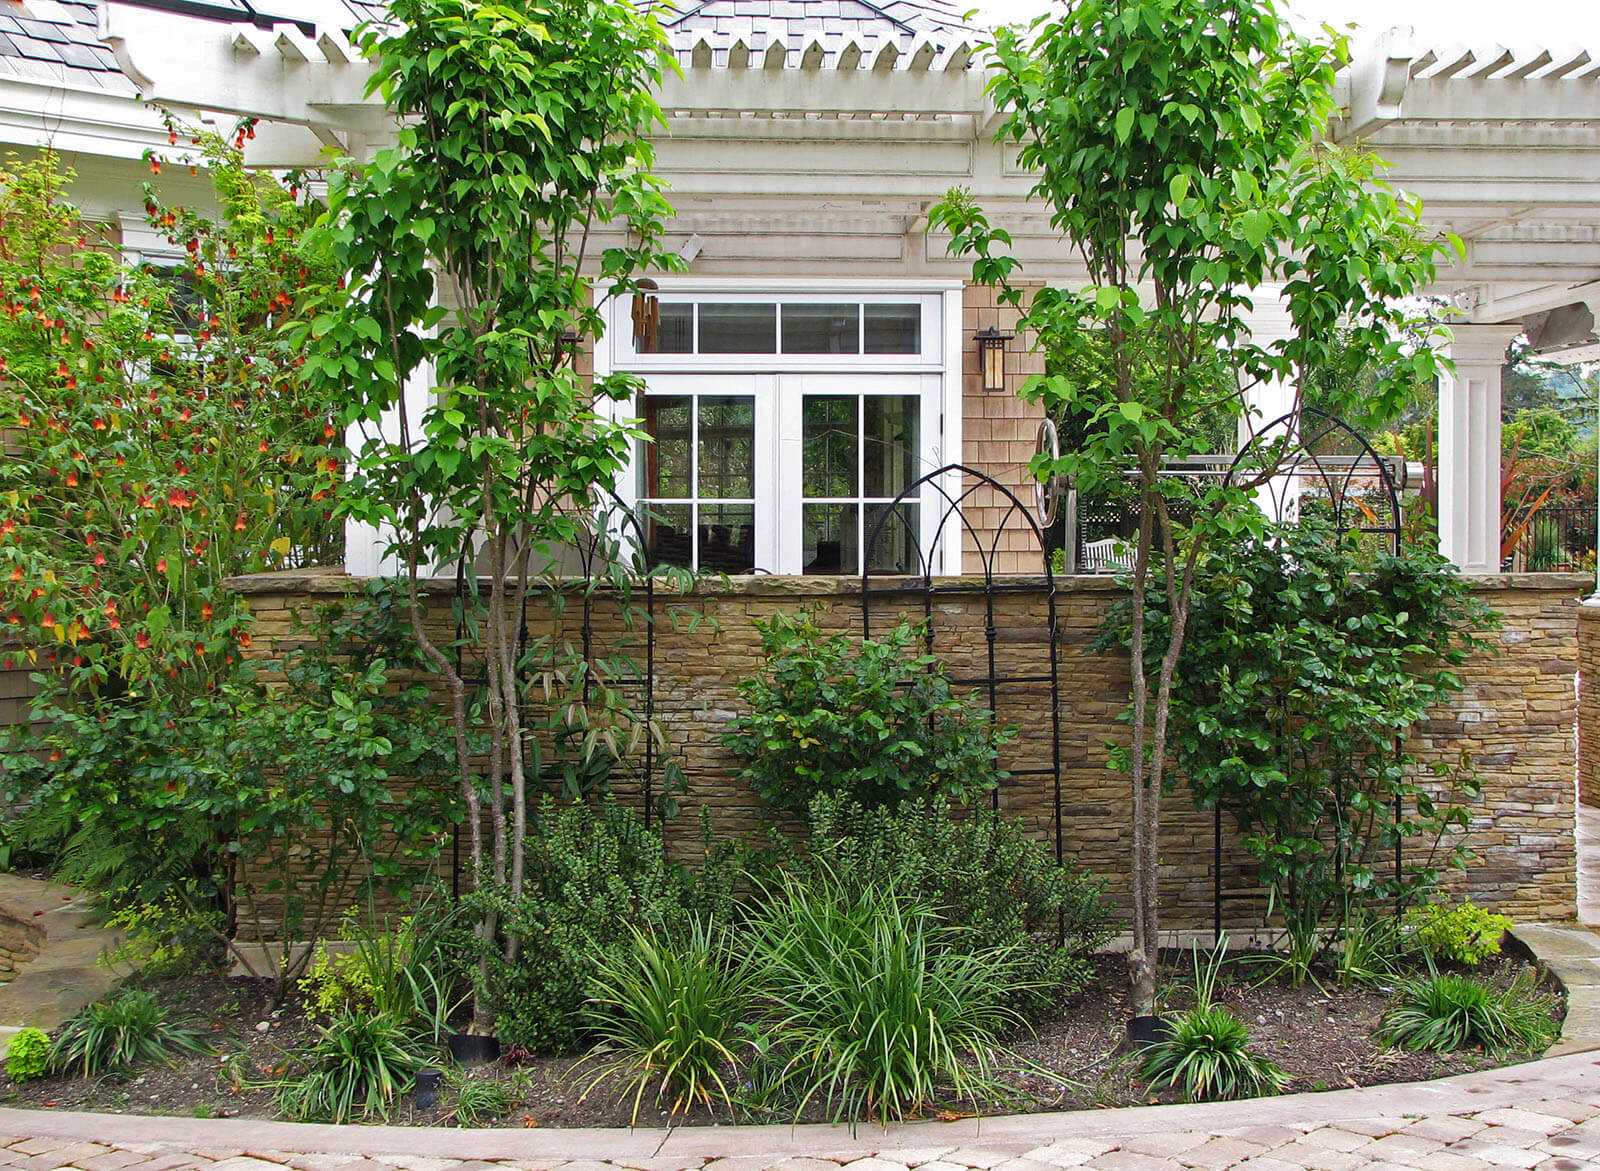 Trees and flowering shrubs along stone-lined brick path next to wrought iron trellises on a five foot stone tile wall by back patio with pergola